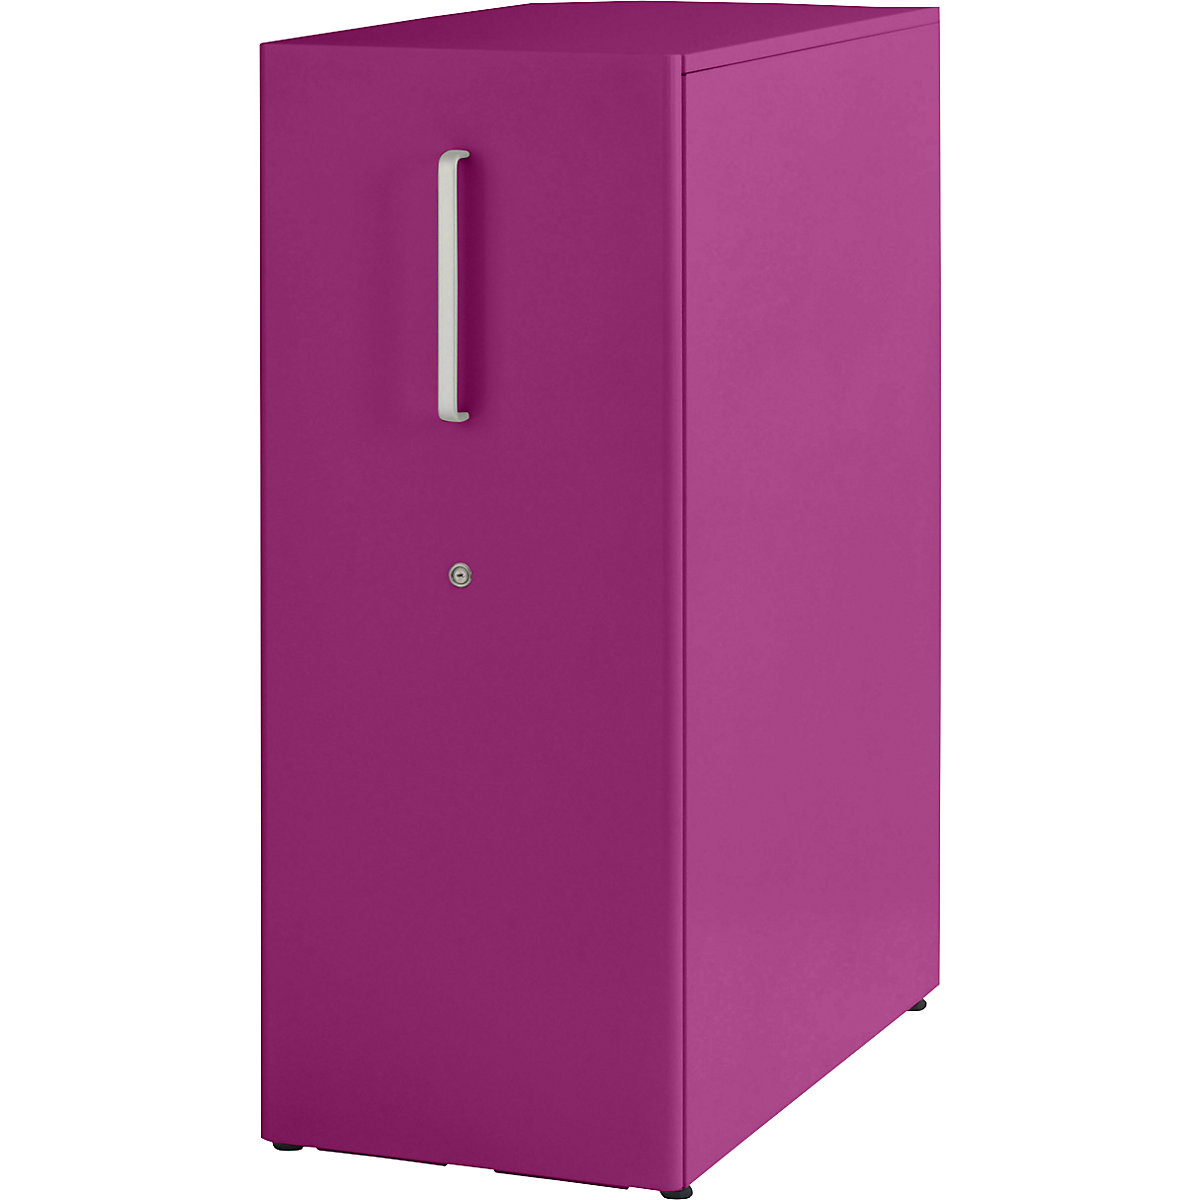 Tower™ 3 add-on furniture, with worktop – BISLEY, for the right side, 3 shelves, fuchsia-5